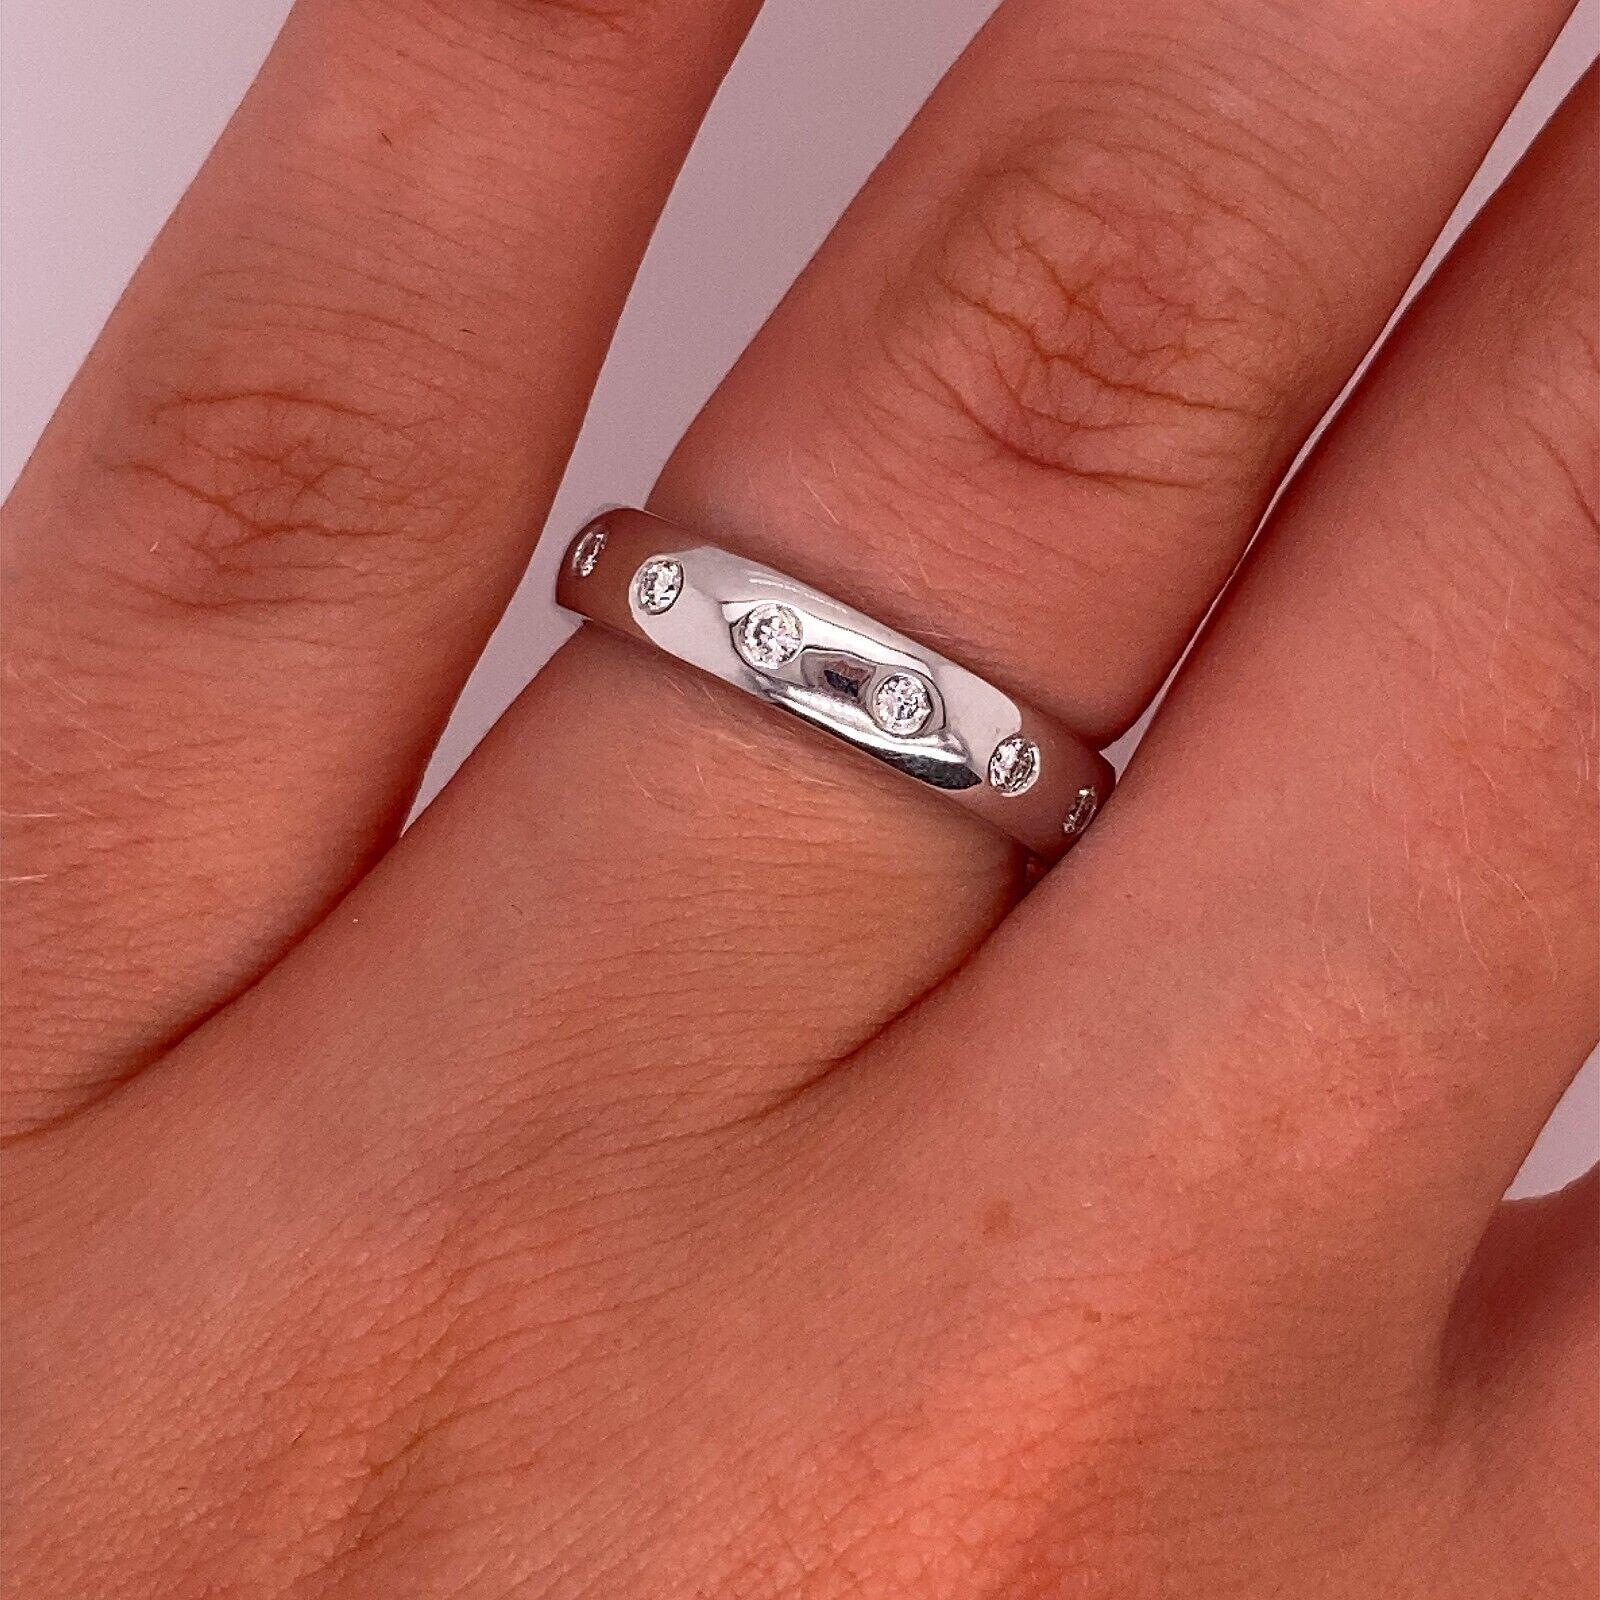 Eternity/Wedding Band Ring Set with 0.40ct of Diamonds in 18ct White Gold In Excellent Condition For Sale In London, GB